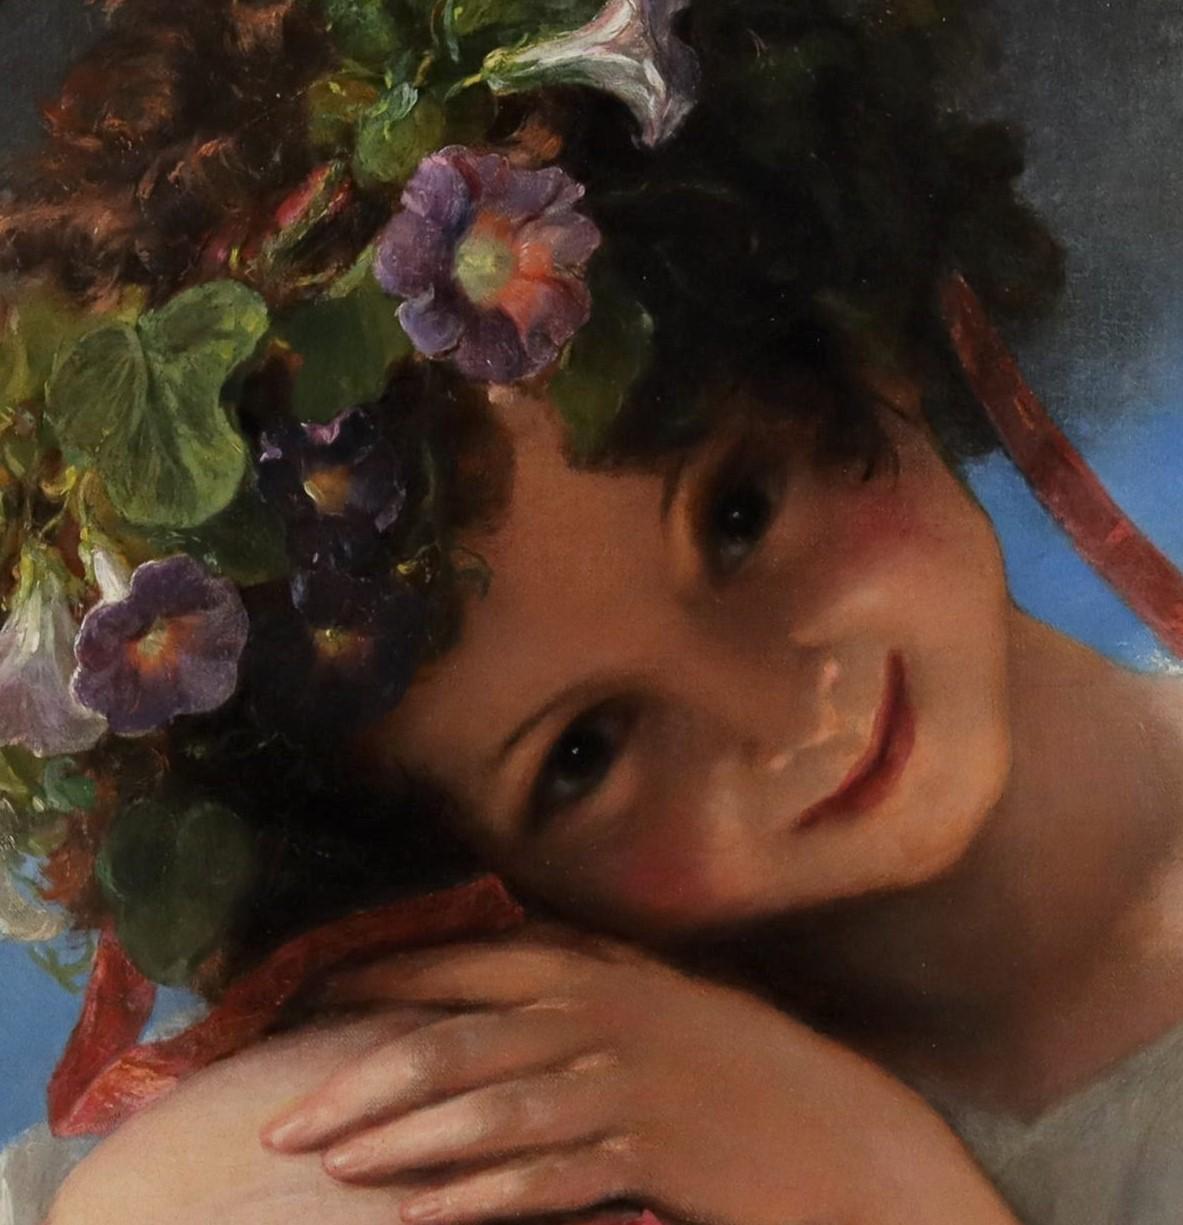 Attributed to James Holland (1799 -1870) and William Henry Hunt (1790-1864)

A Portrait of a Young Girl Wearing a Garland of Morning Glory Flowers

Oil on canvas: 17 ½ x 18 in. Frame: 23 ½ x 24 in. Circa 1820

An enchanting head and shoulders